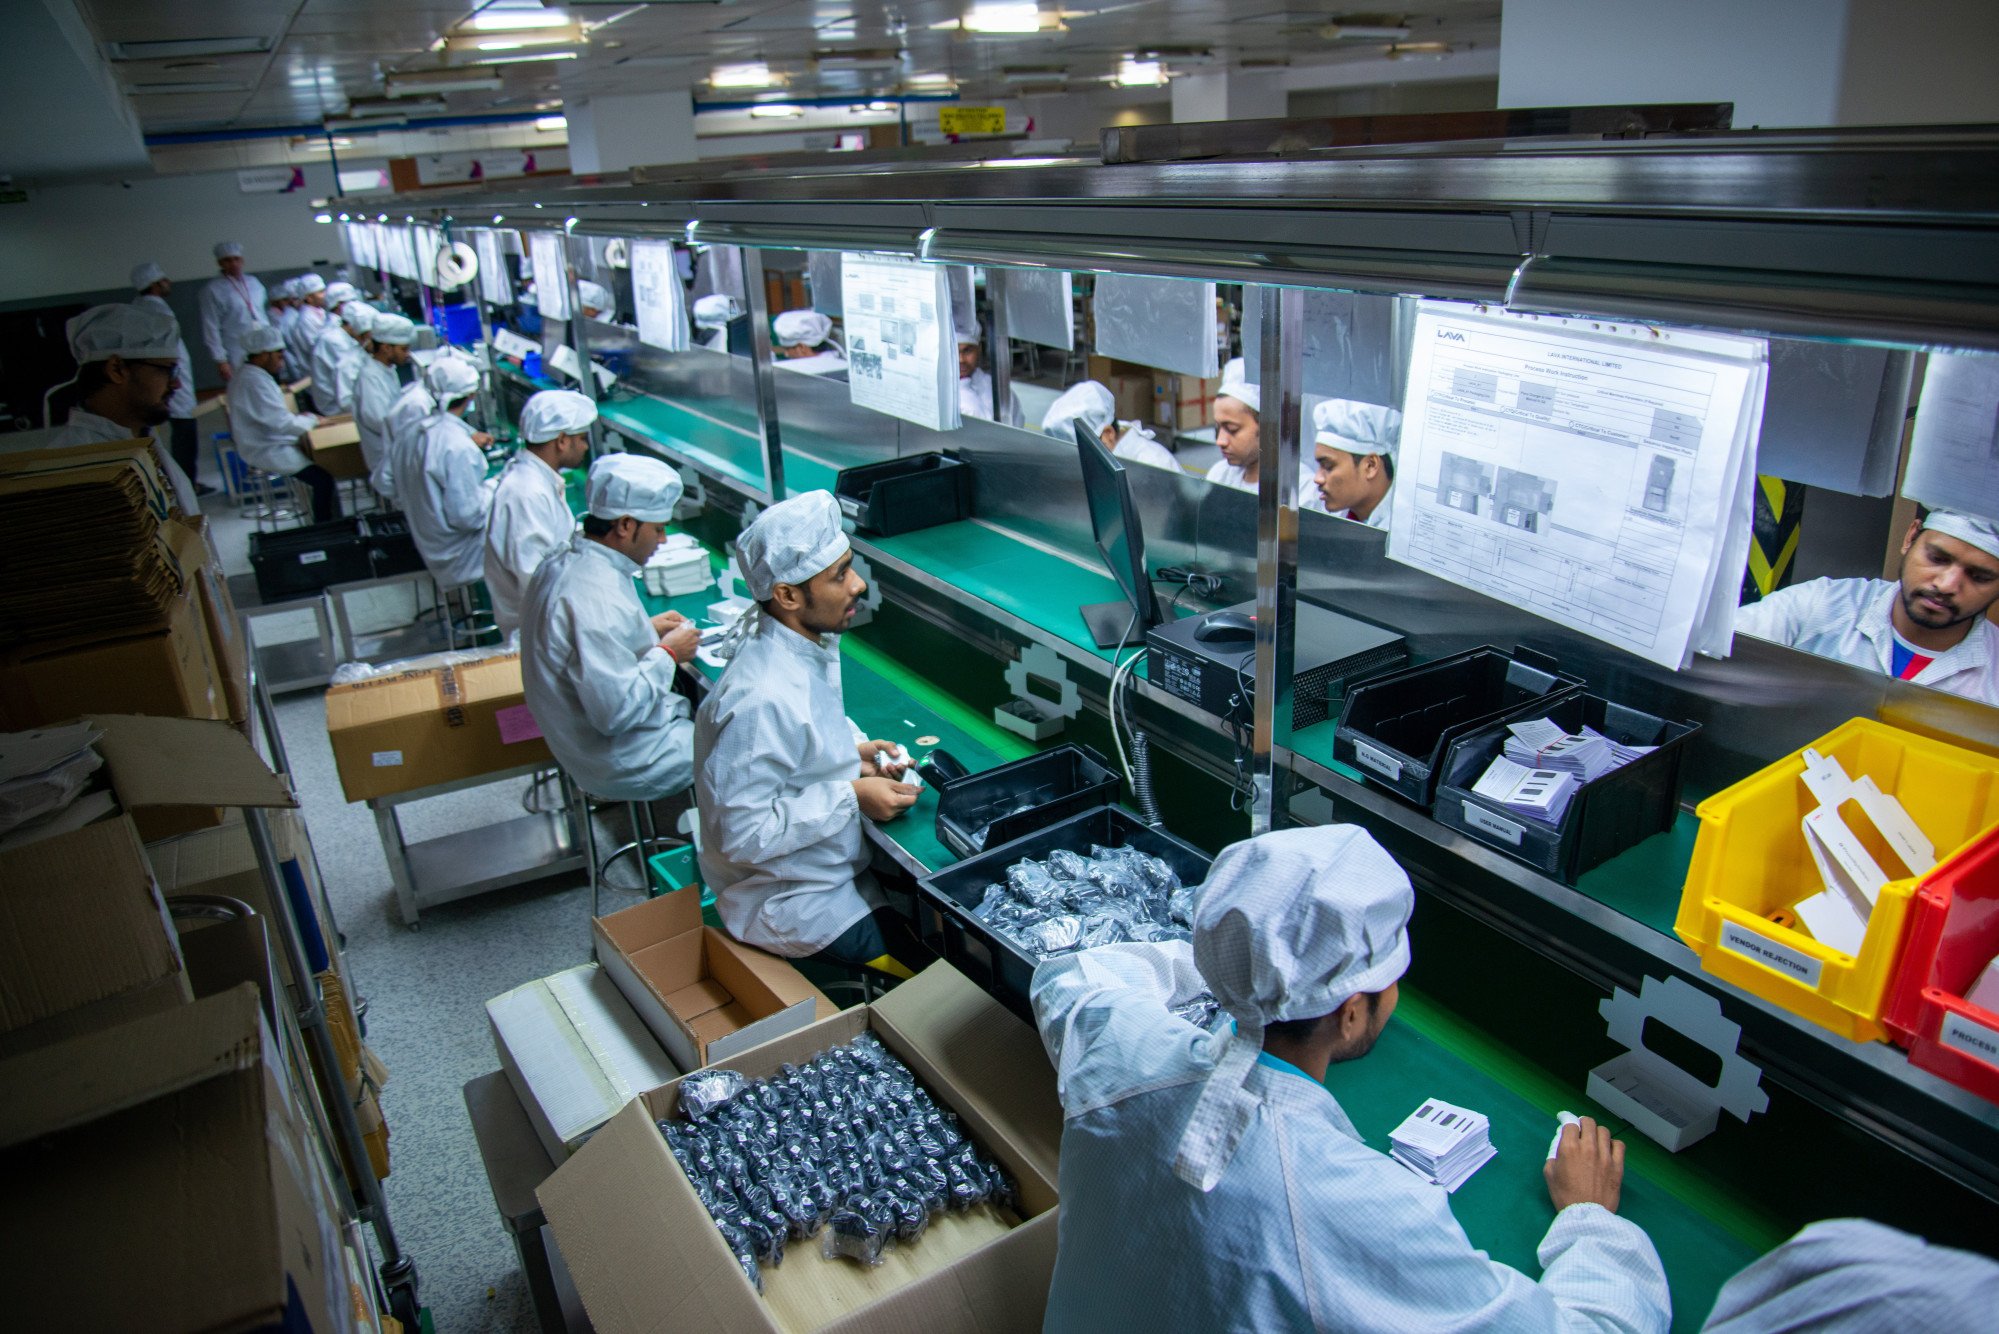 Technicians and engineers work at a mobile-phone manufacturing factory in Noida, India’s Uttar Pradesh state. Chinese components are still needed for many of the products that India manufactures. Photo: Shutterstock